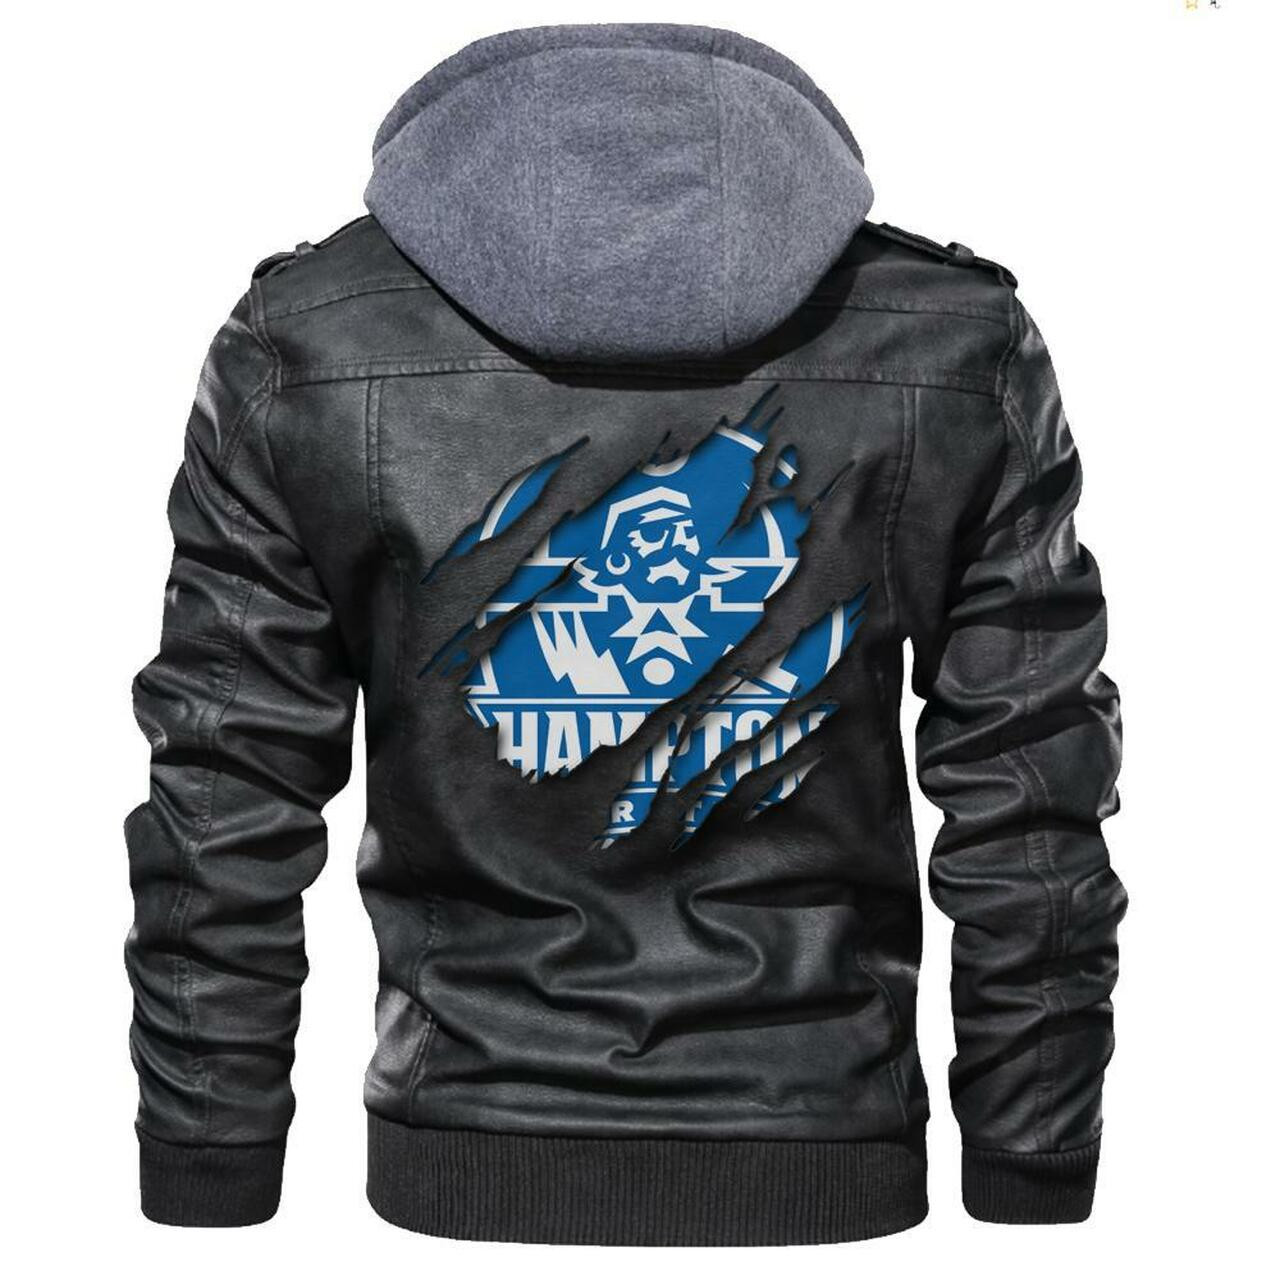 Order Best Quality leather jacket In One Click 101